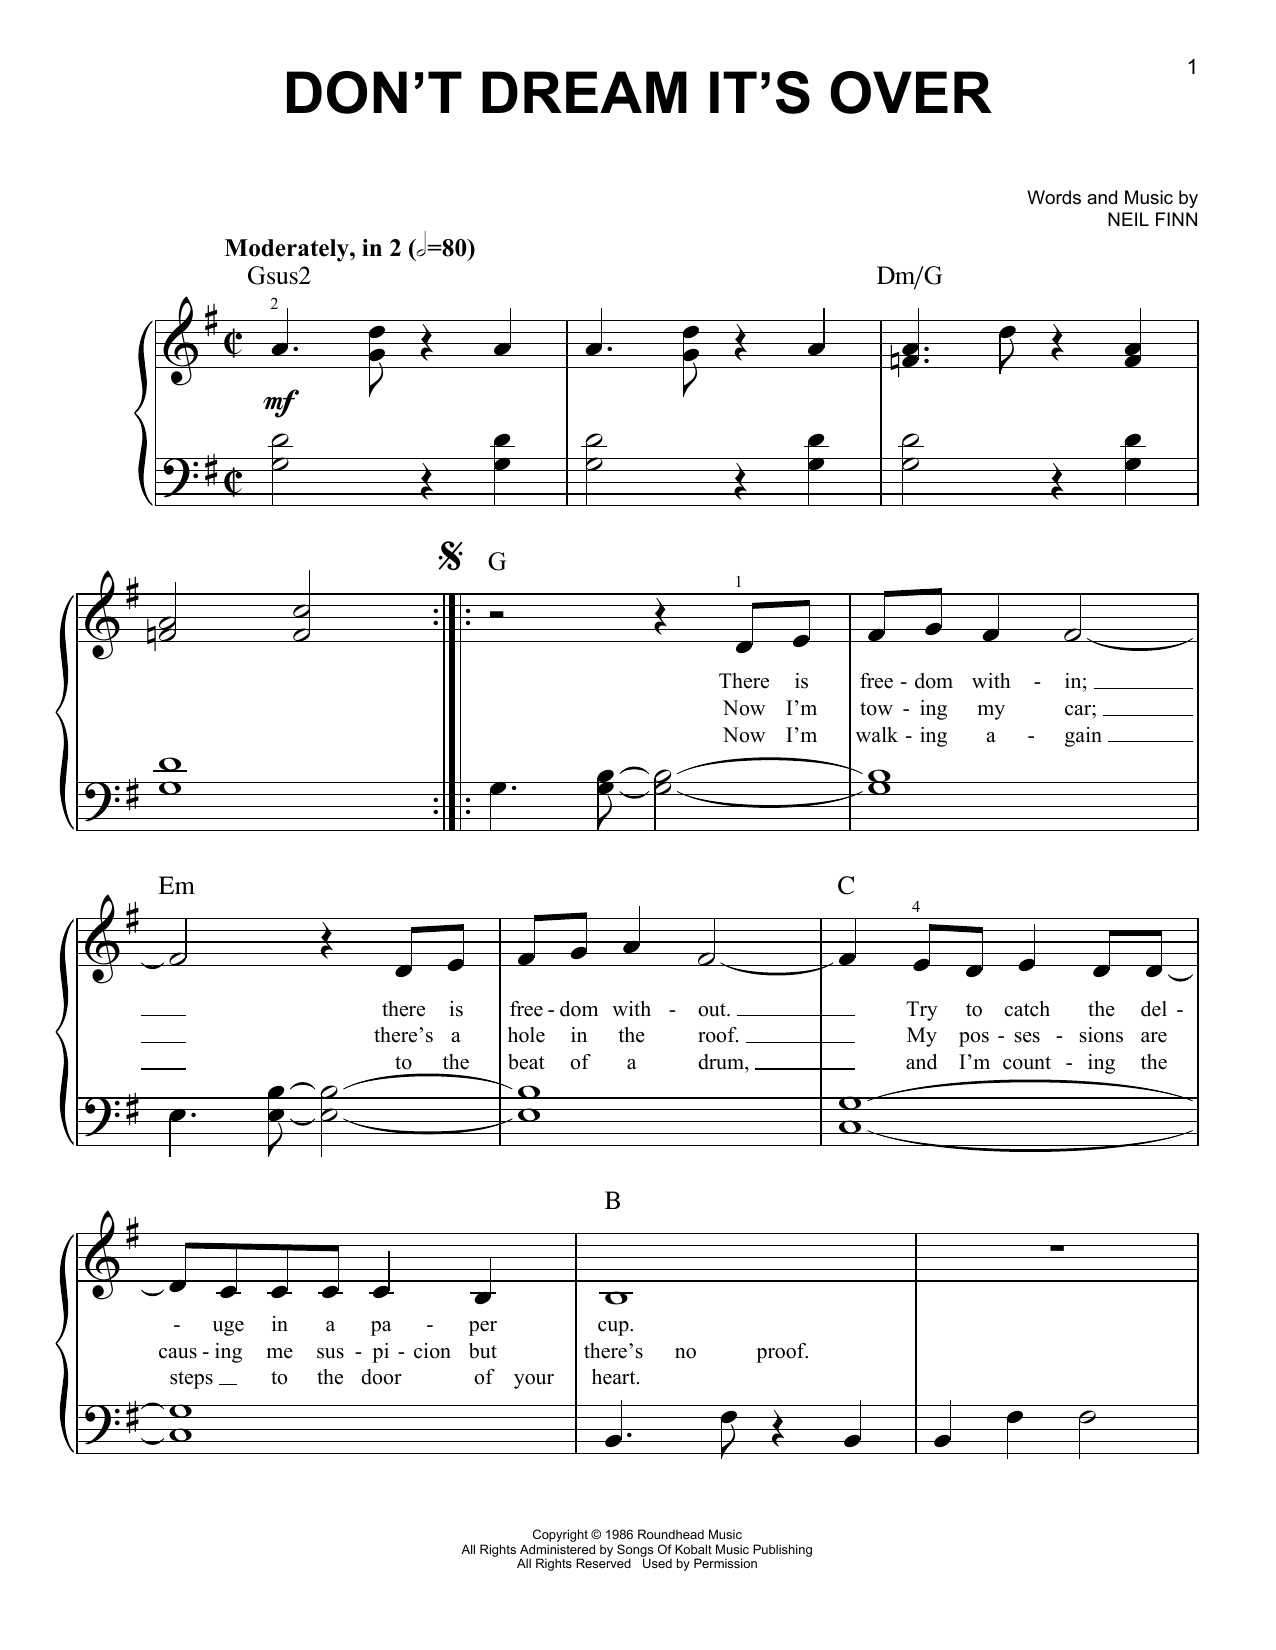 Crowded House Don't Dream It's Over sheet music notes and chords. Download Printable PDF.